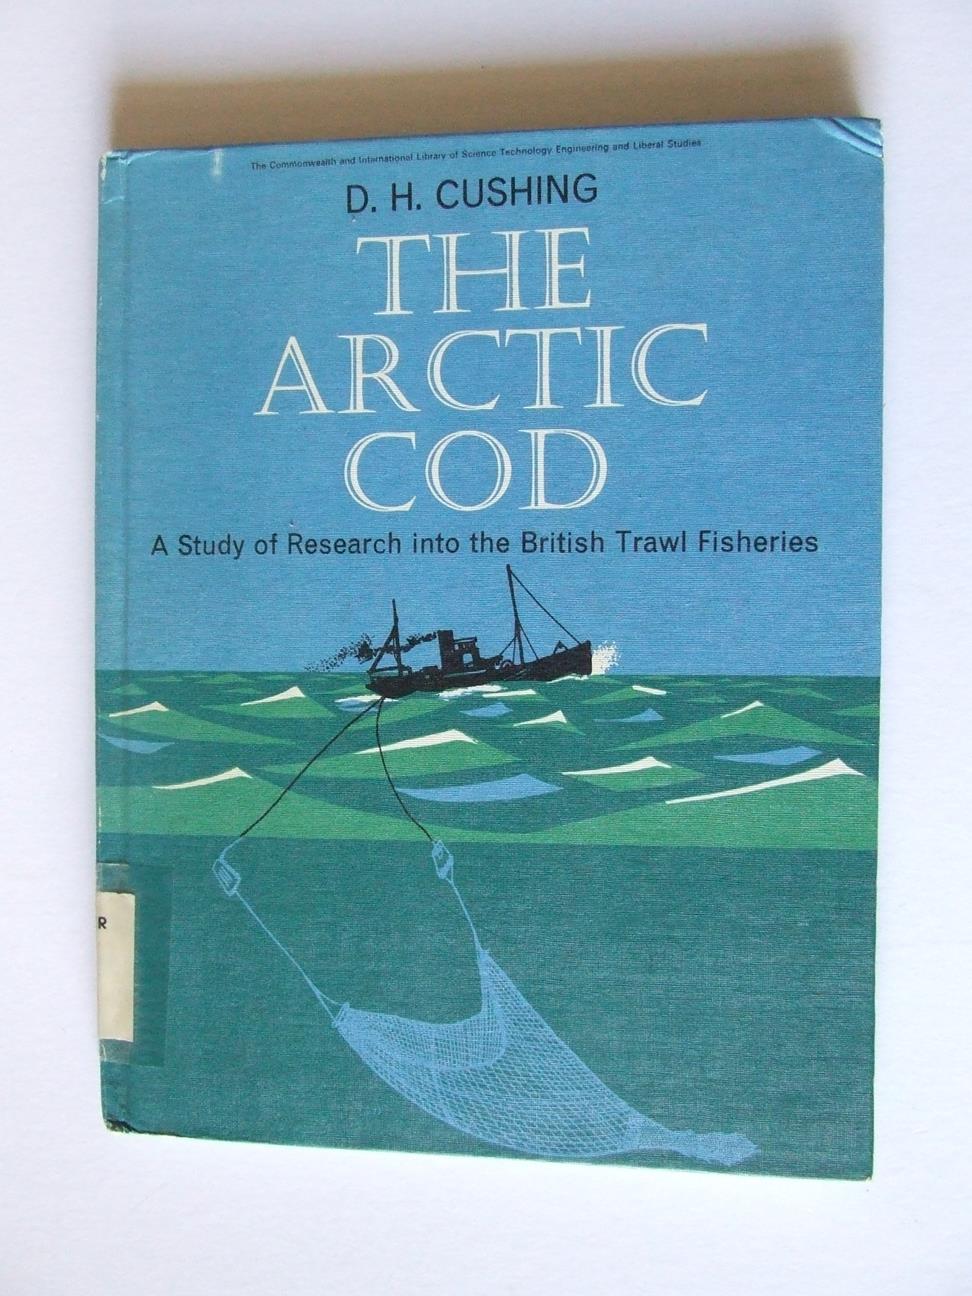 The Arctic Cod, a study of research into the British Trawl Fisheries.